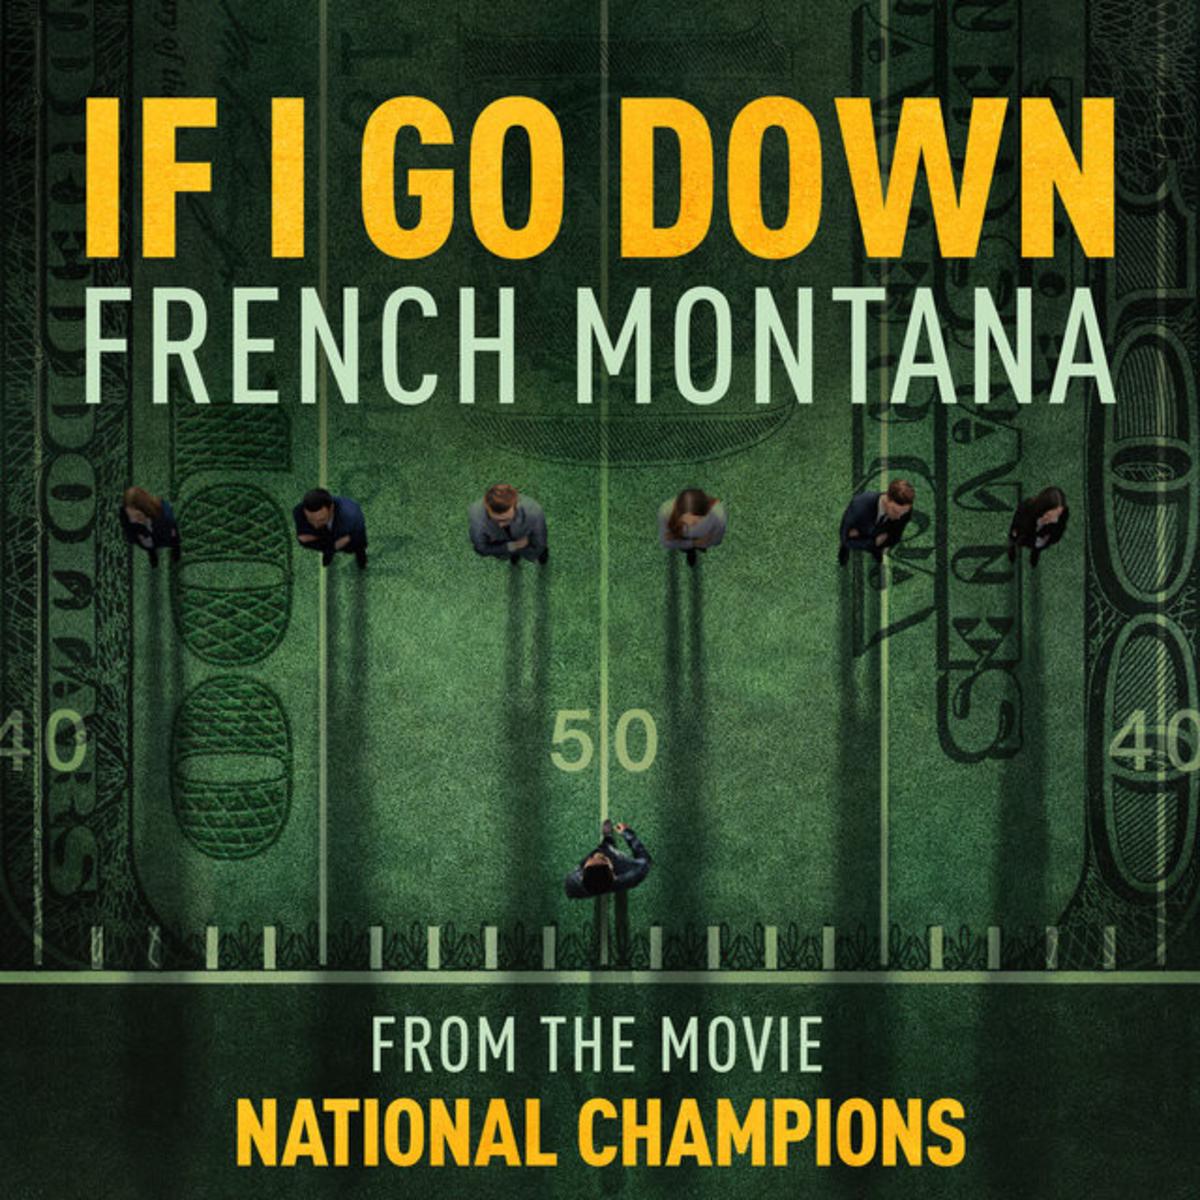 French Montana Makes His Quick Return To The Music Scene With “If I Go Down”